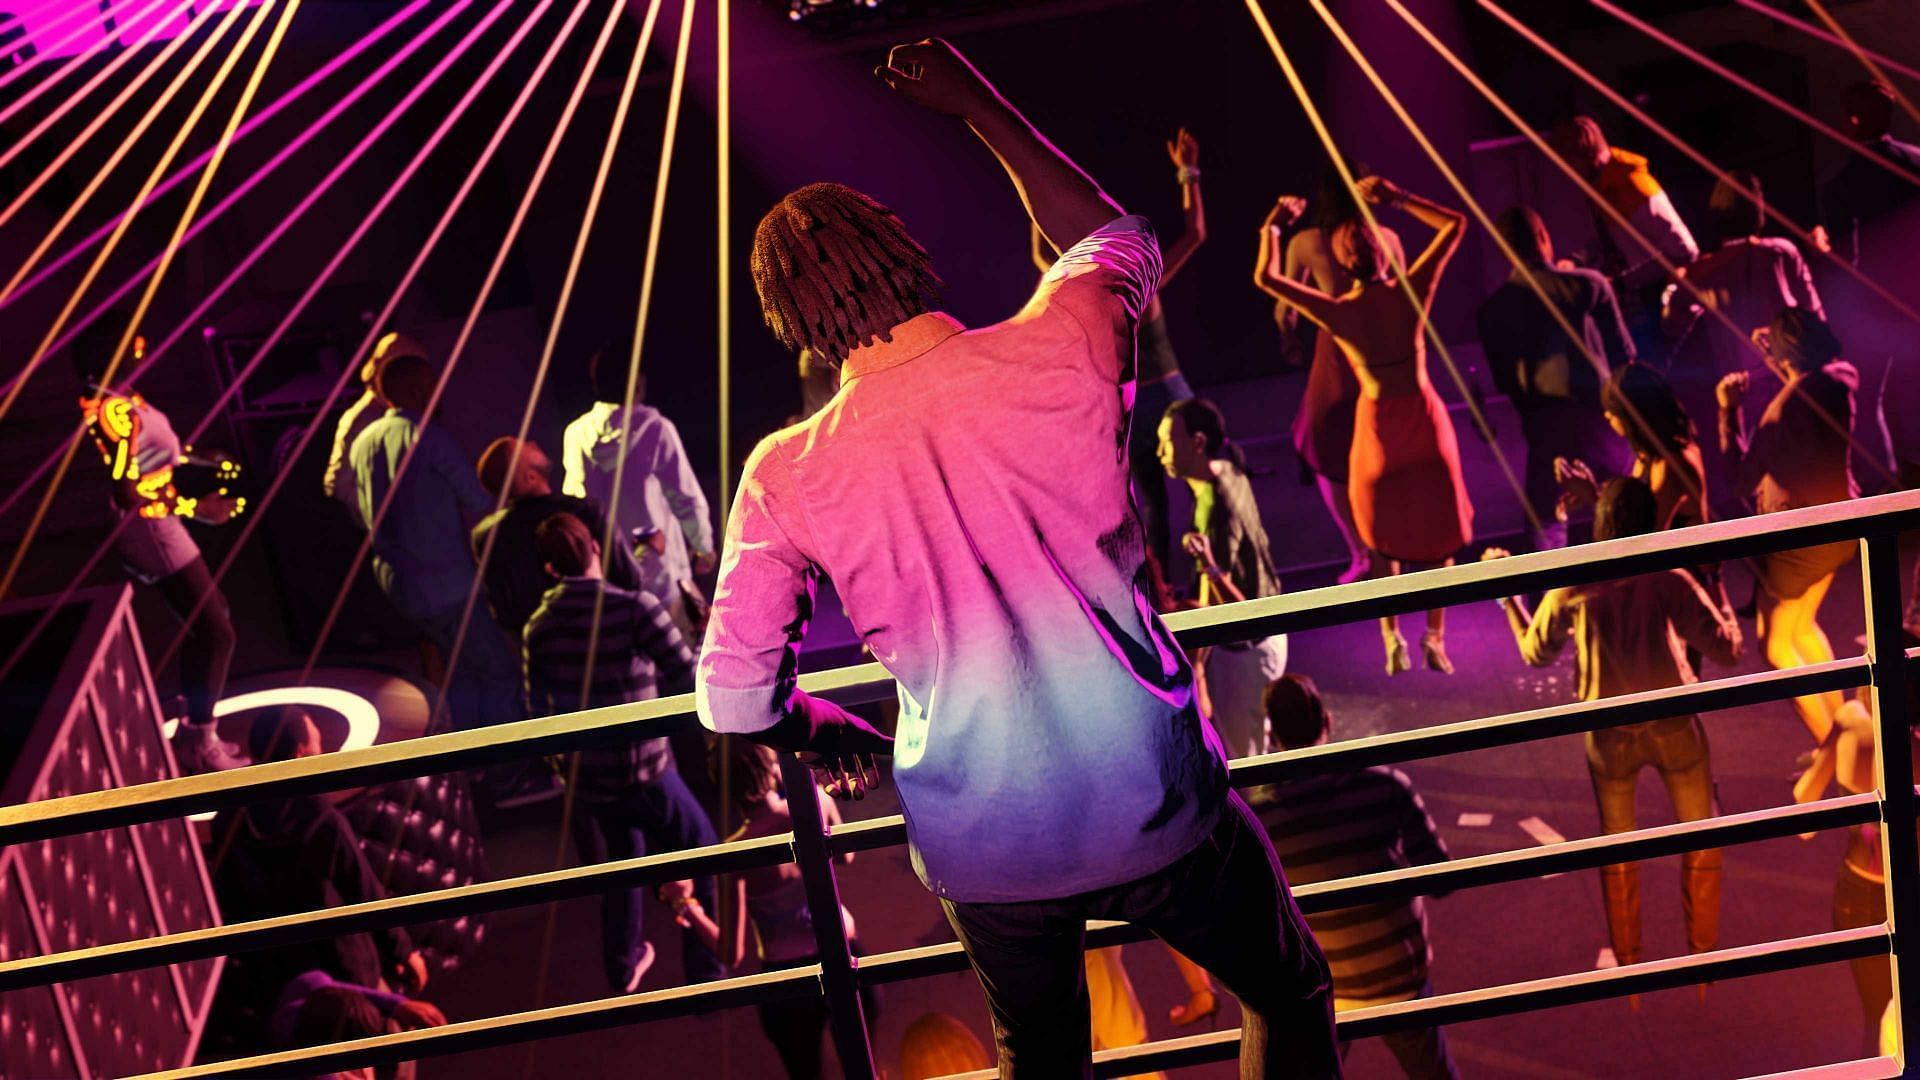 The Nightclub is another great business to own (Image via Rockstar Games)